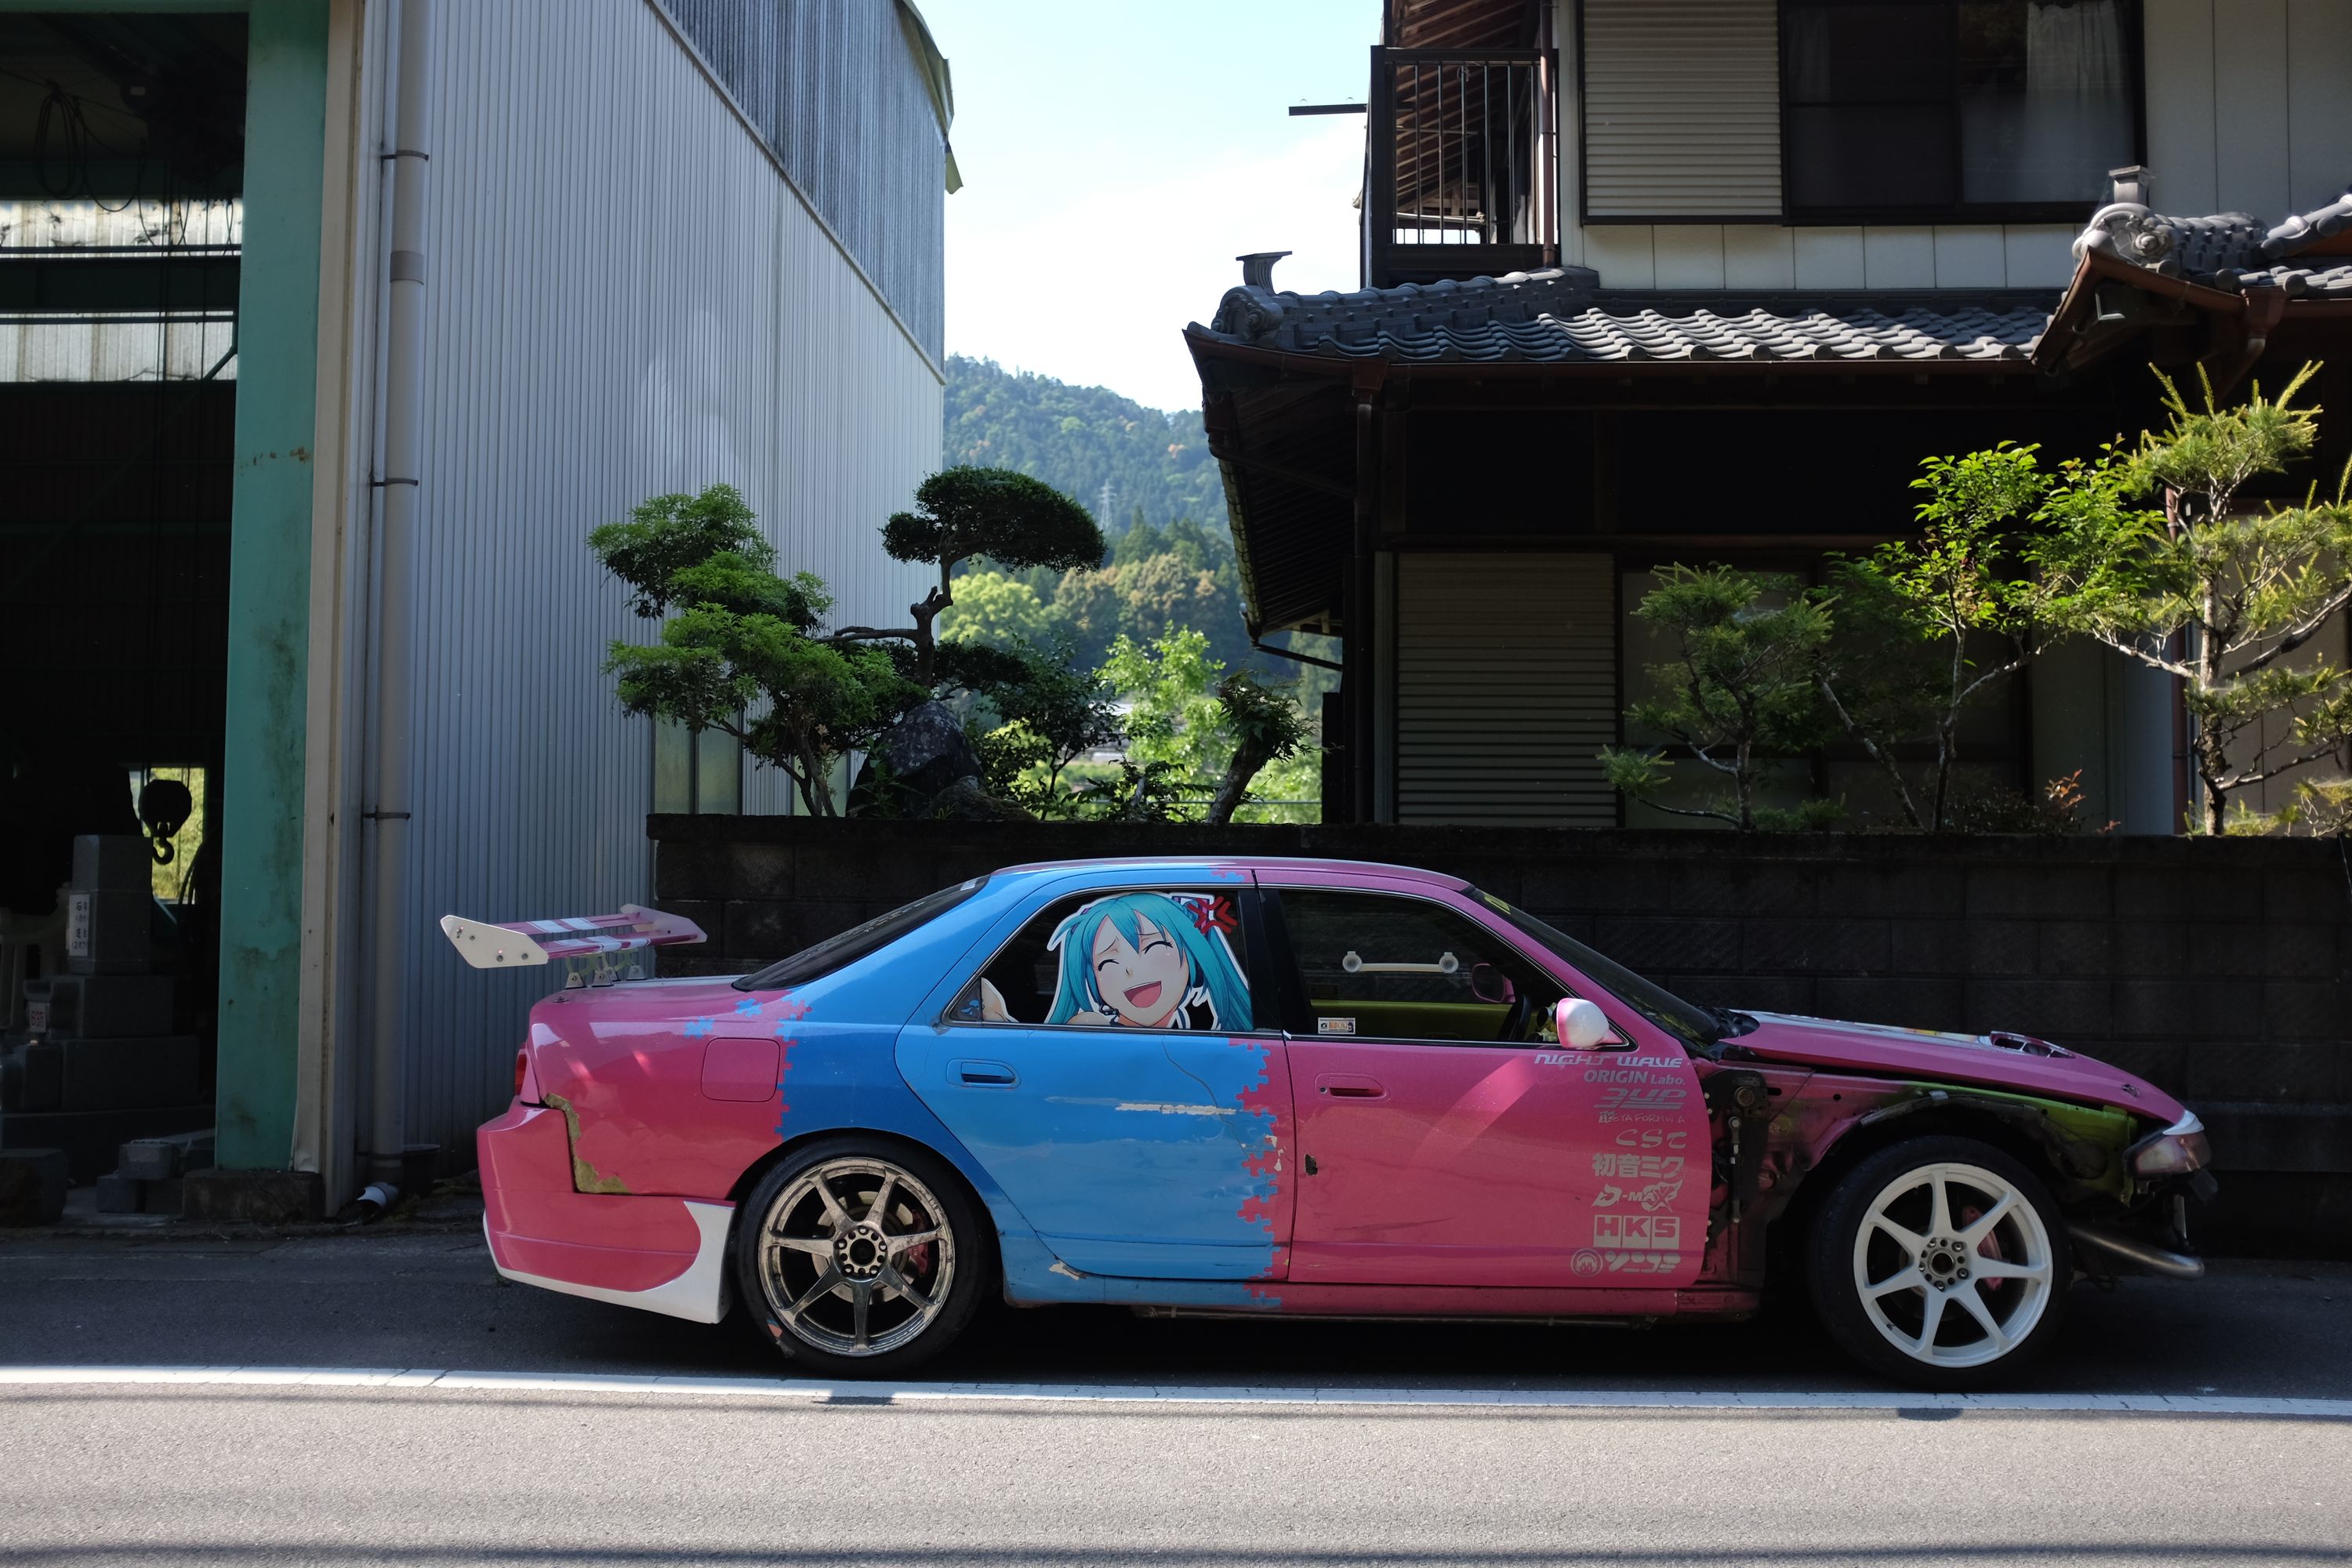 A pink and sky blue Nissan Skyline R32 parked in front of a Japanese house.